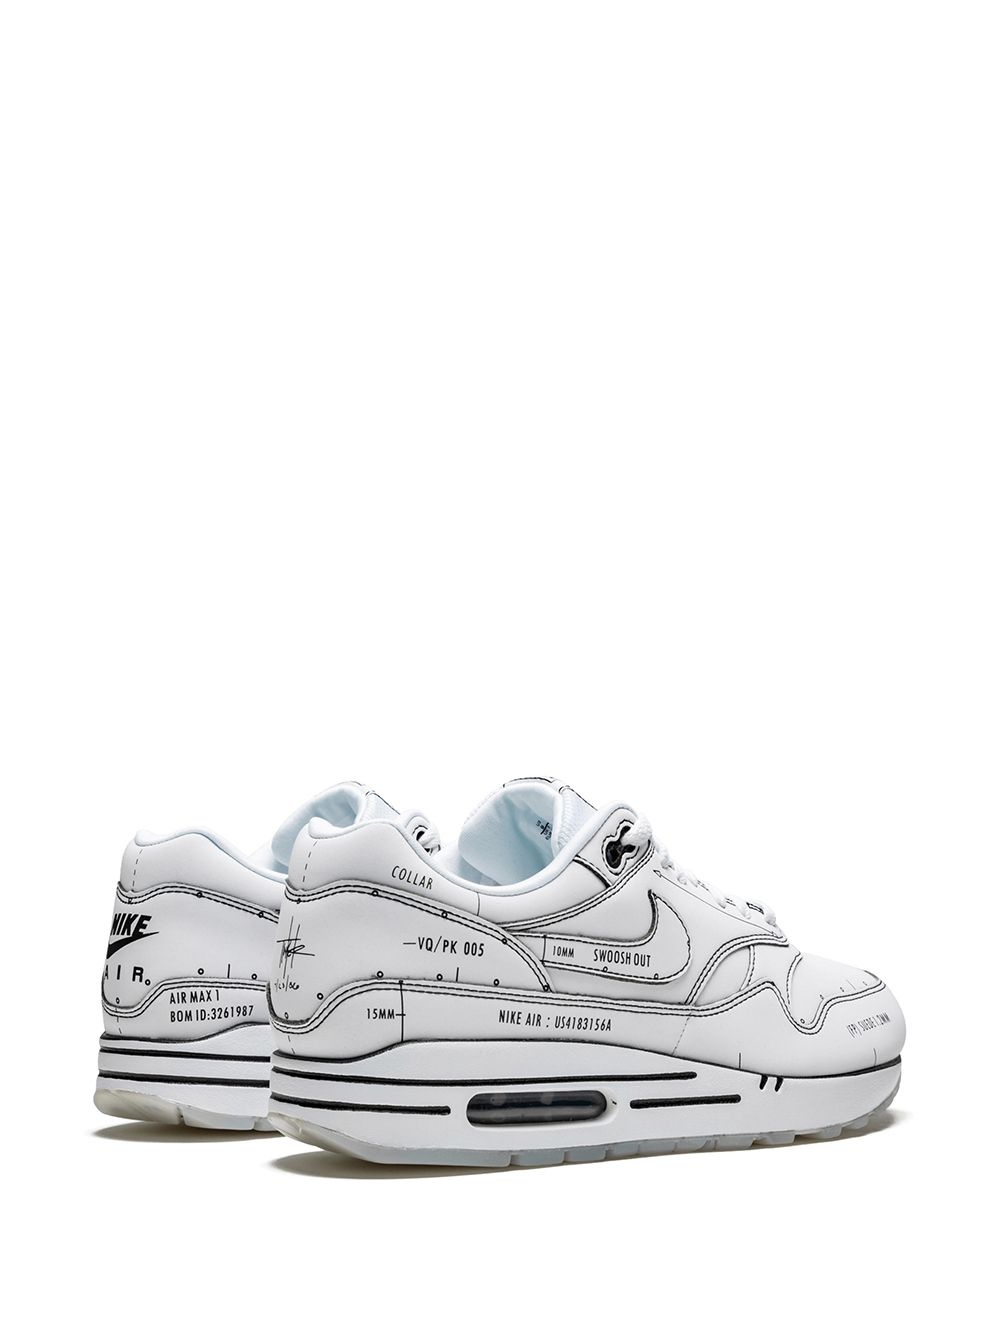 Air Max 1 "Sketch Schematic" sneakers - 3